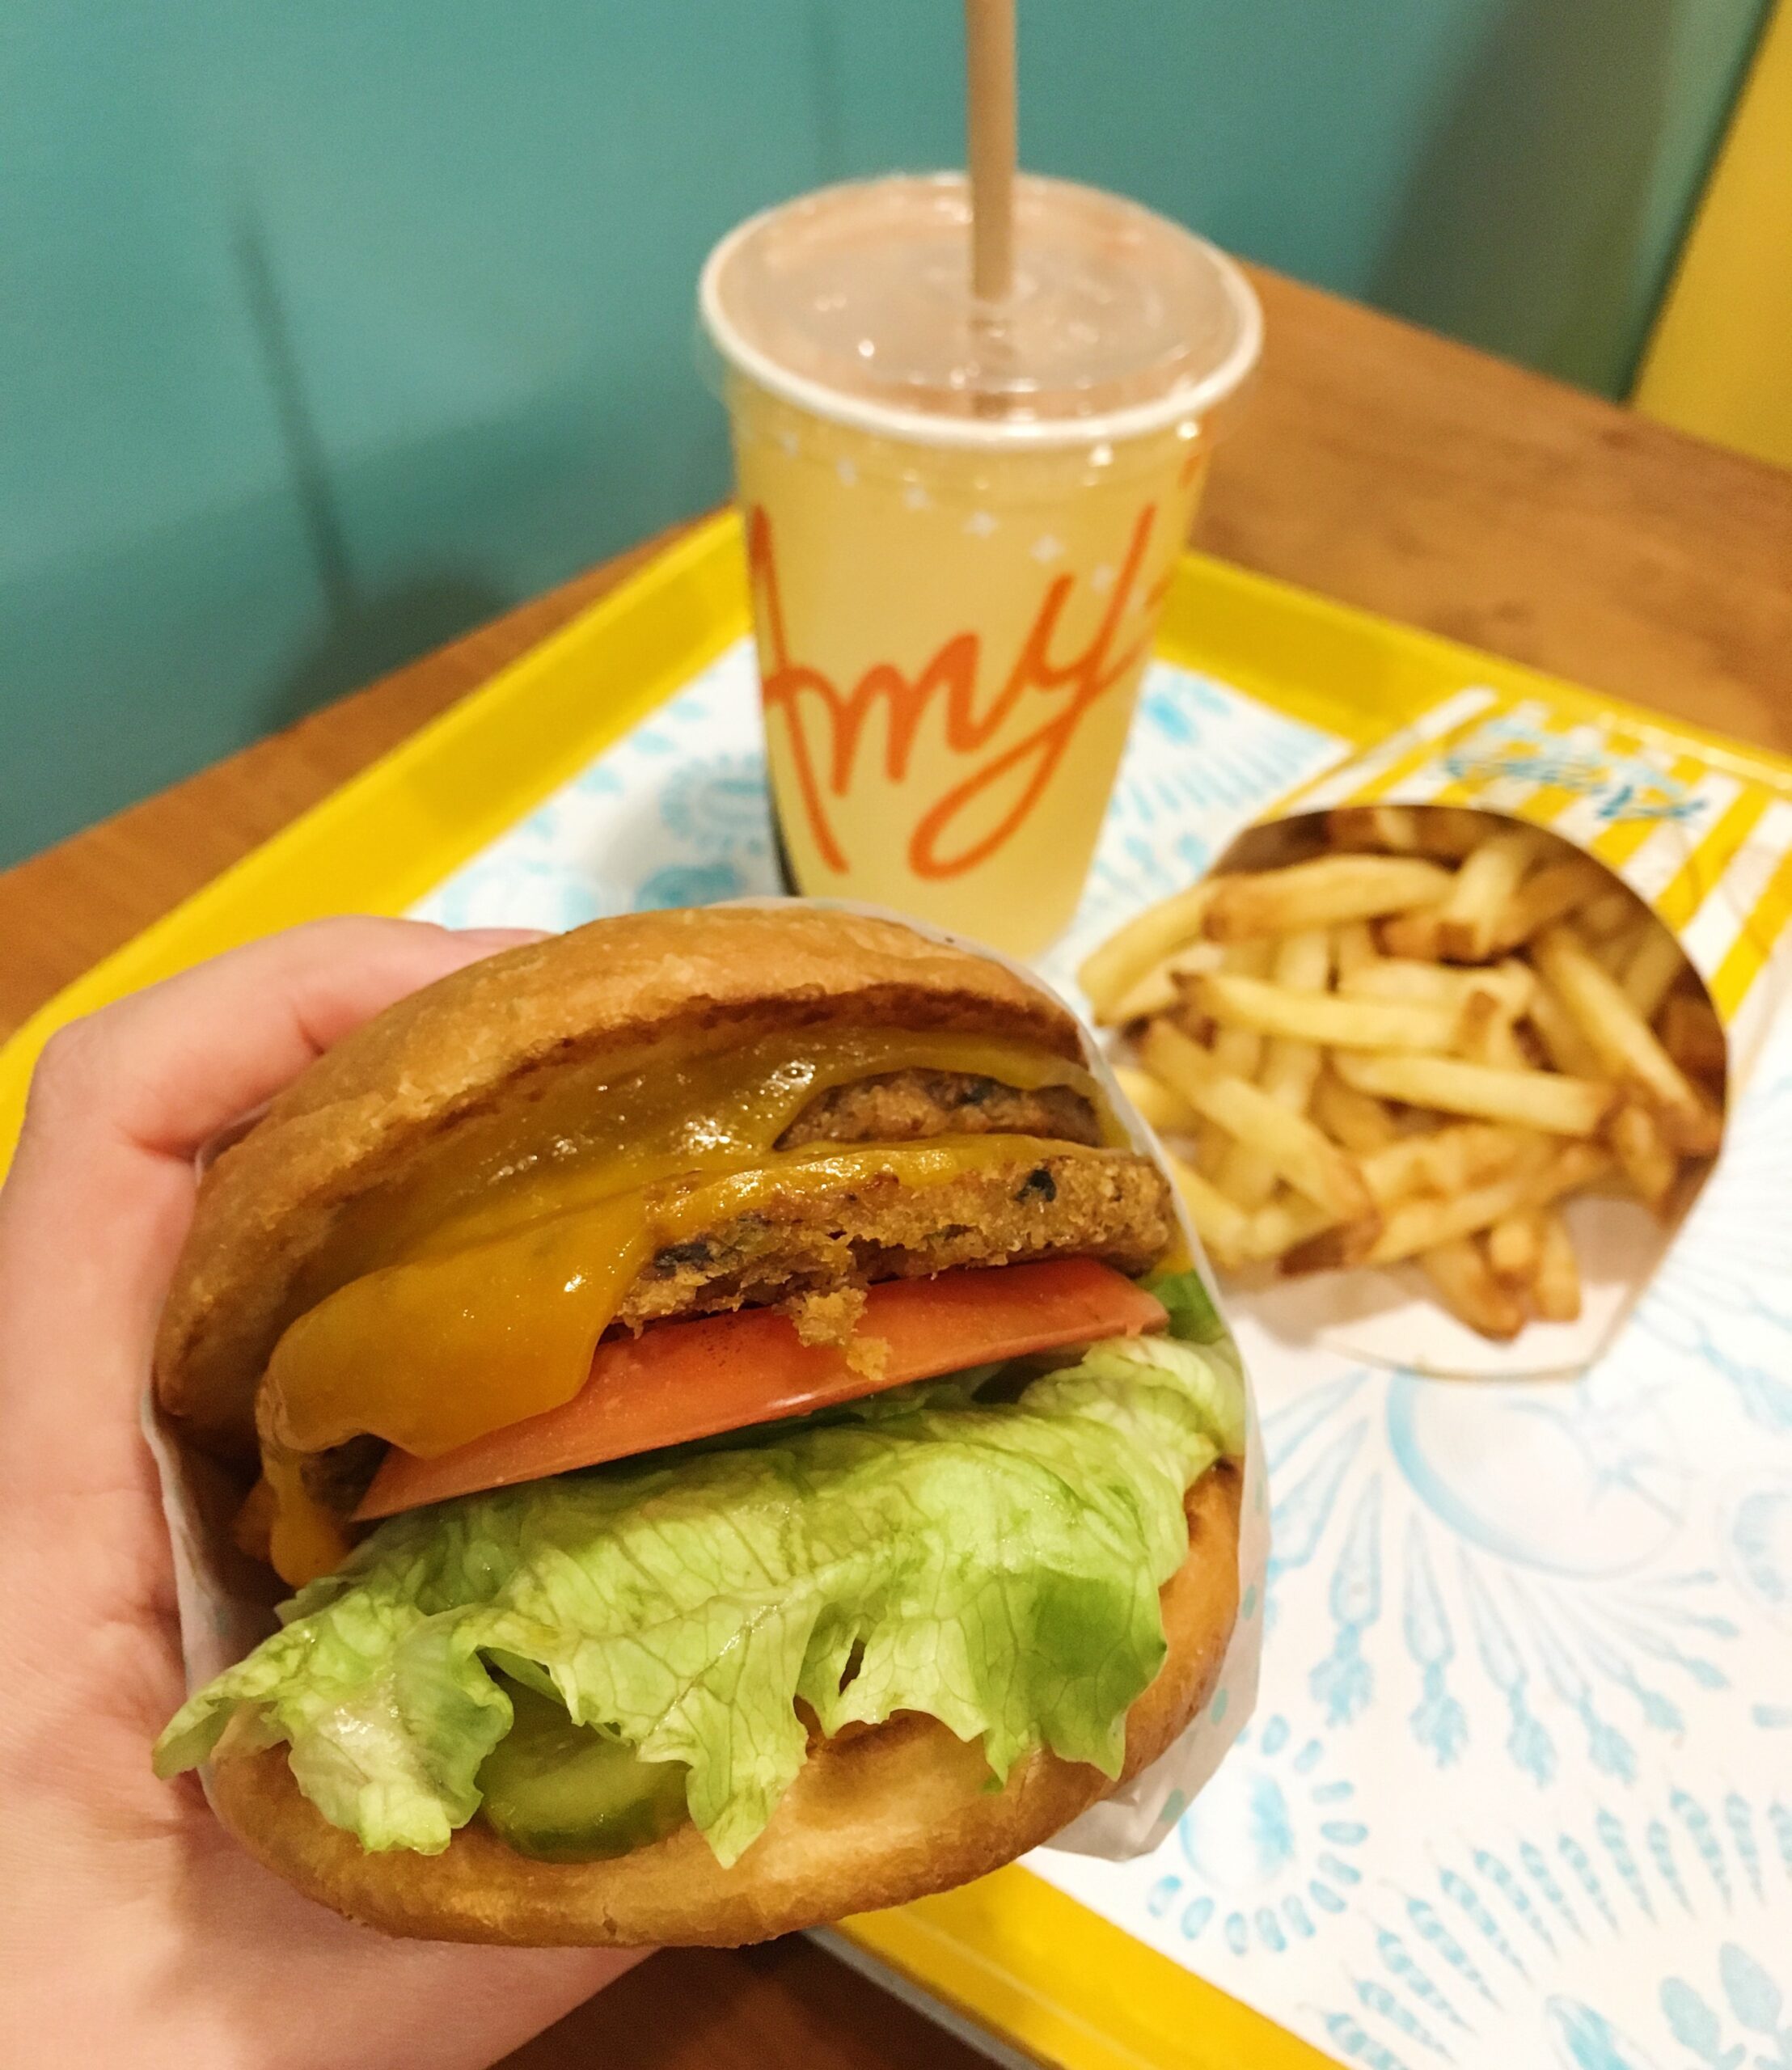 burgers, fries, and a milkshake at amy's drive thru in rohnert park, sonoma county, misconceptions about veganism